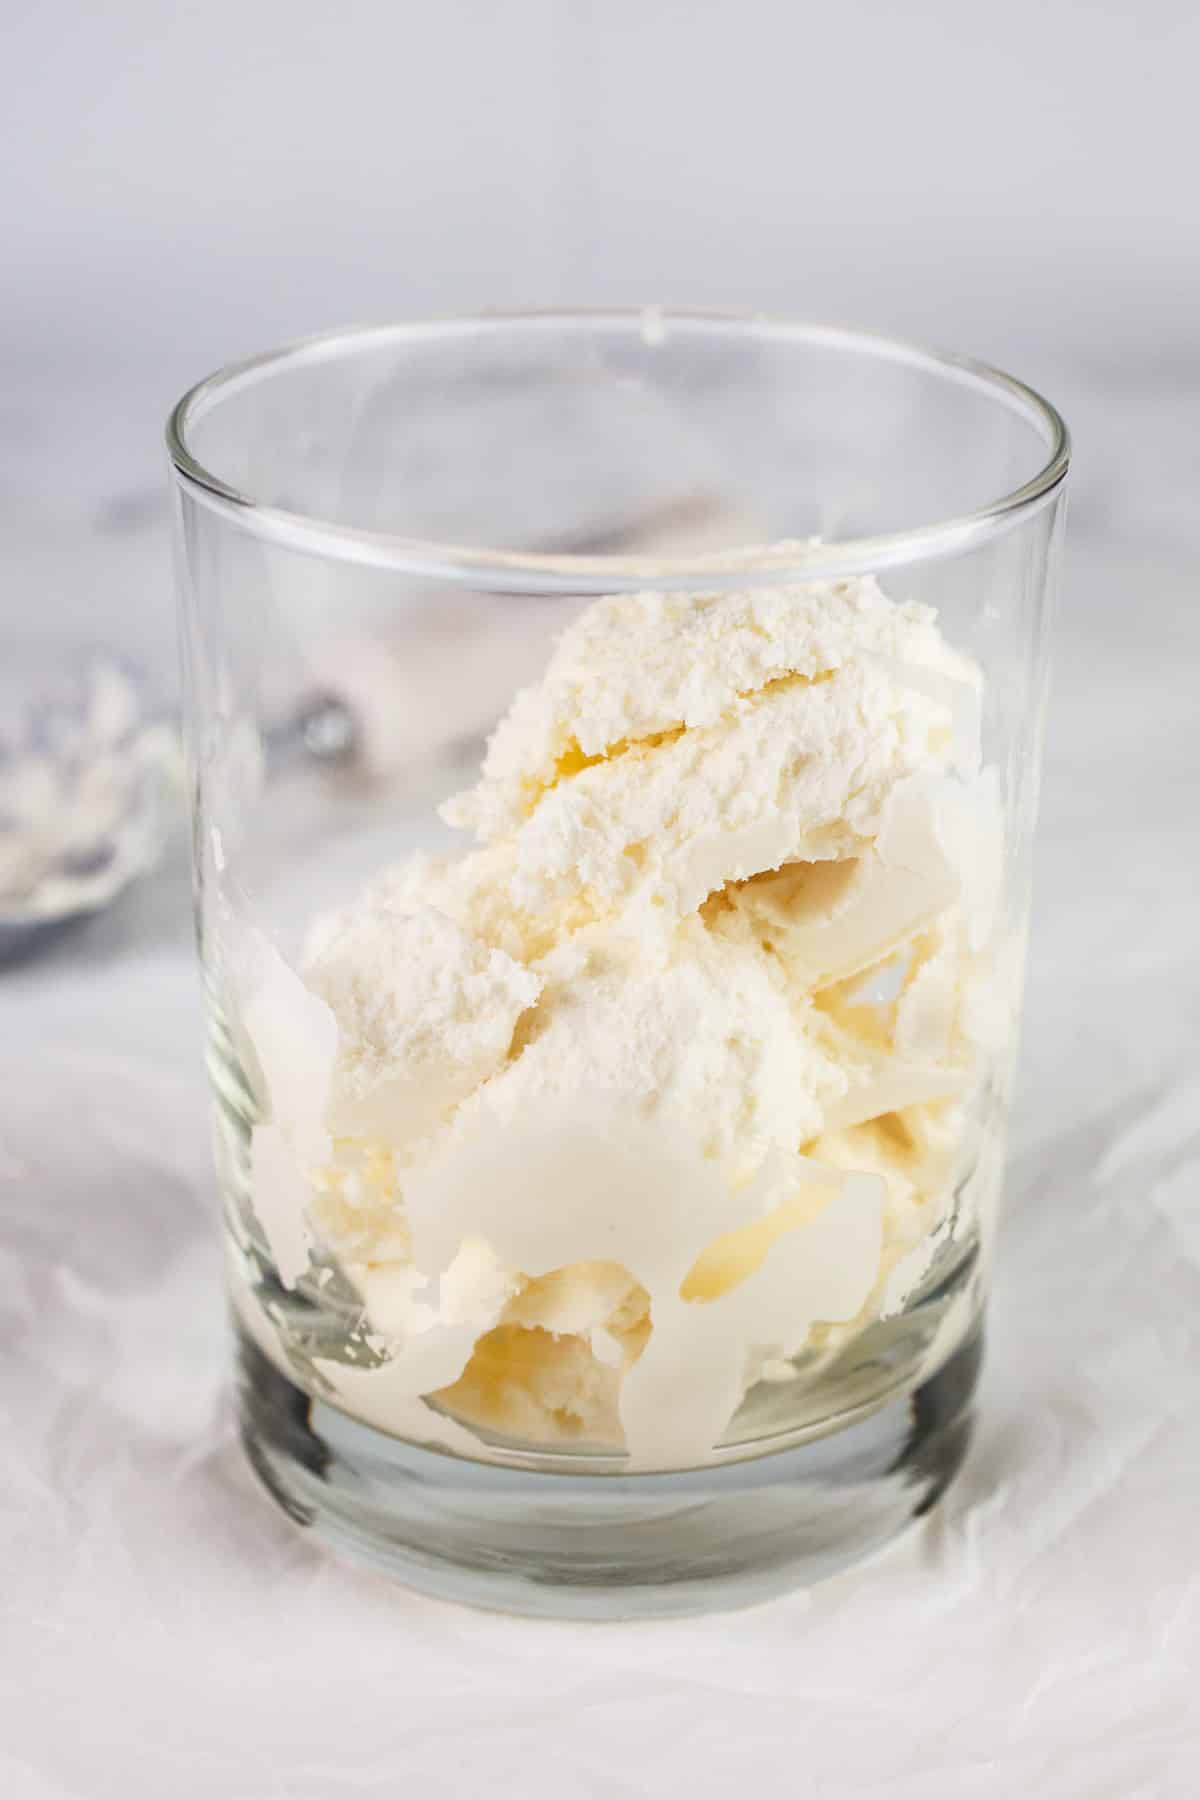 Scoops of vanilla ice cream in glass on white surface.